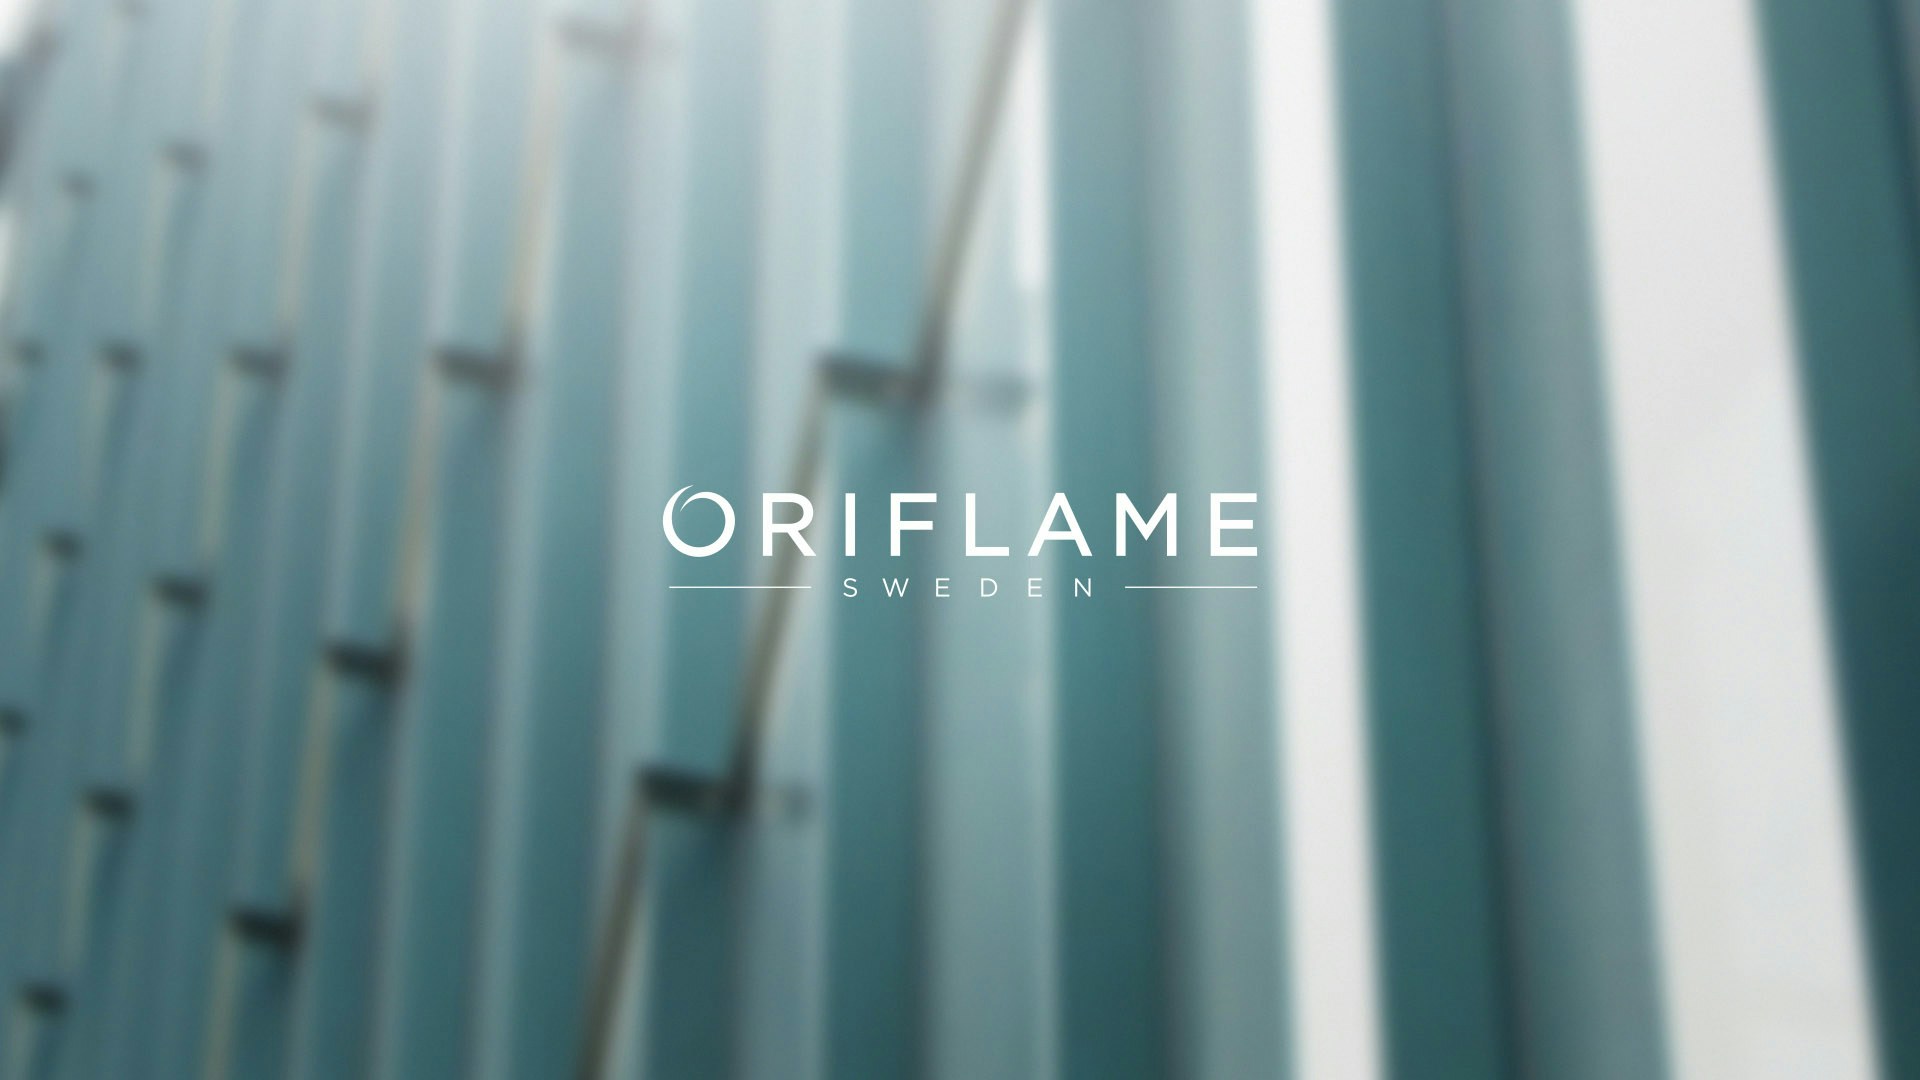 Oriflame logo with depth of field building in the background.